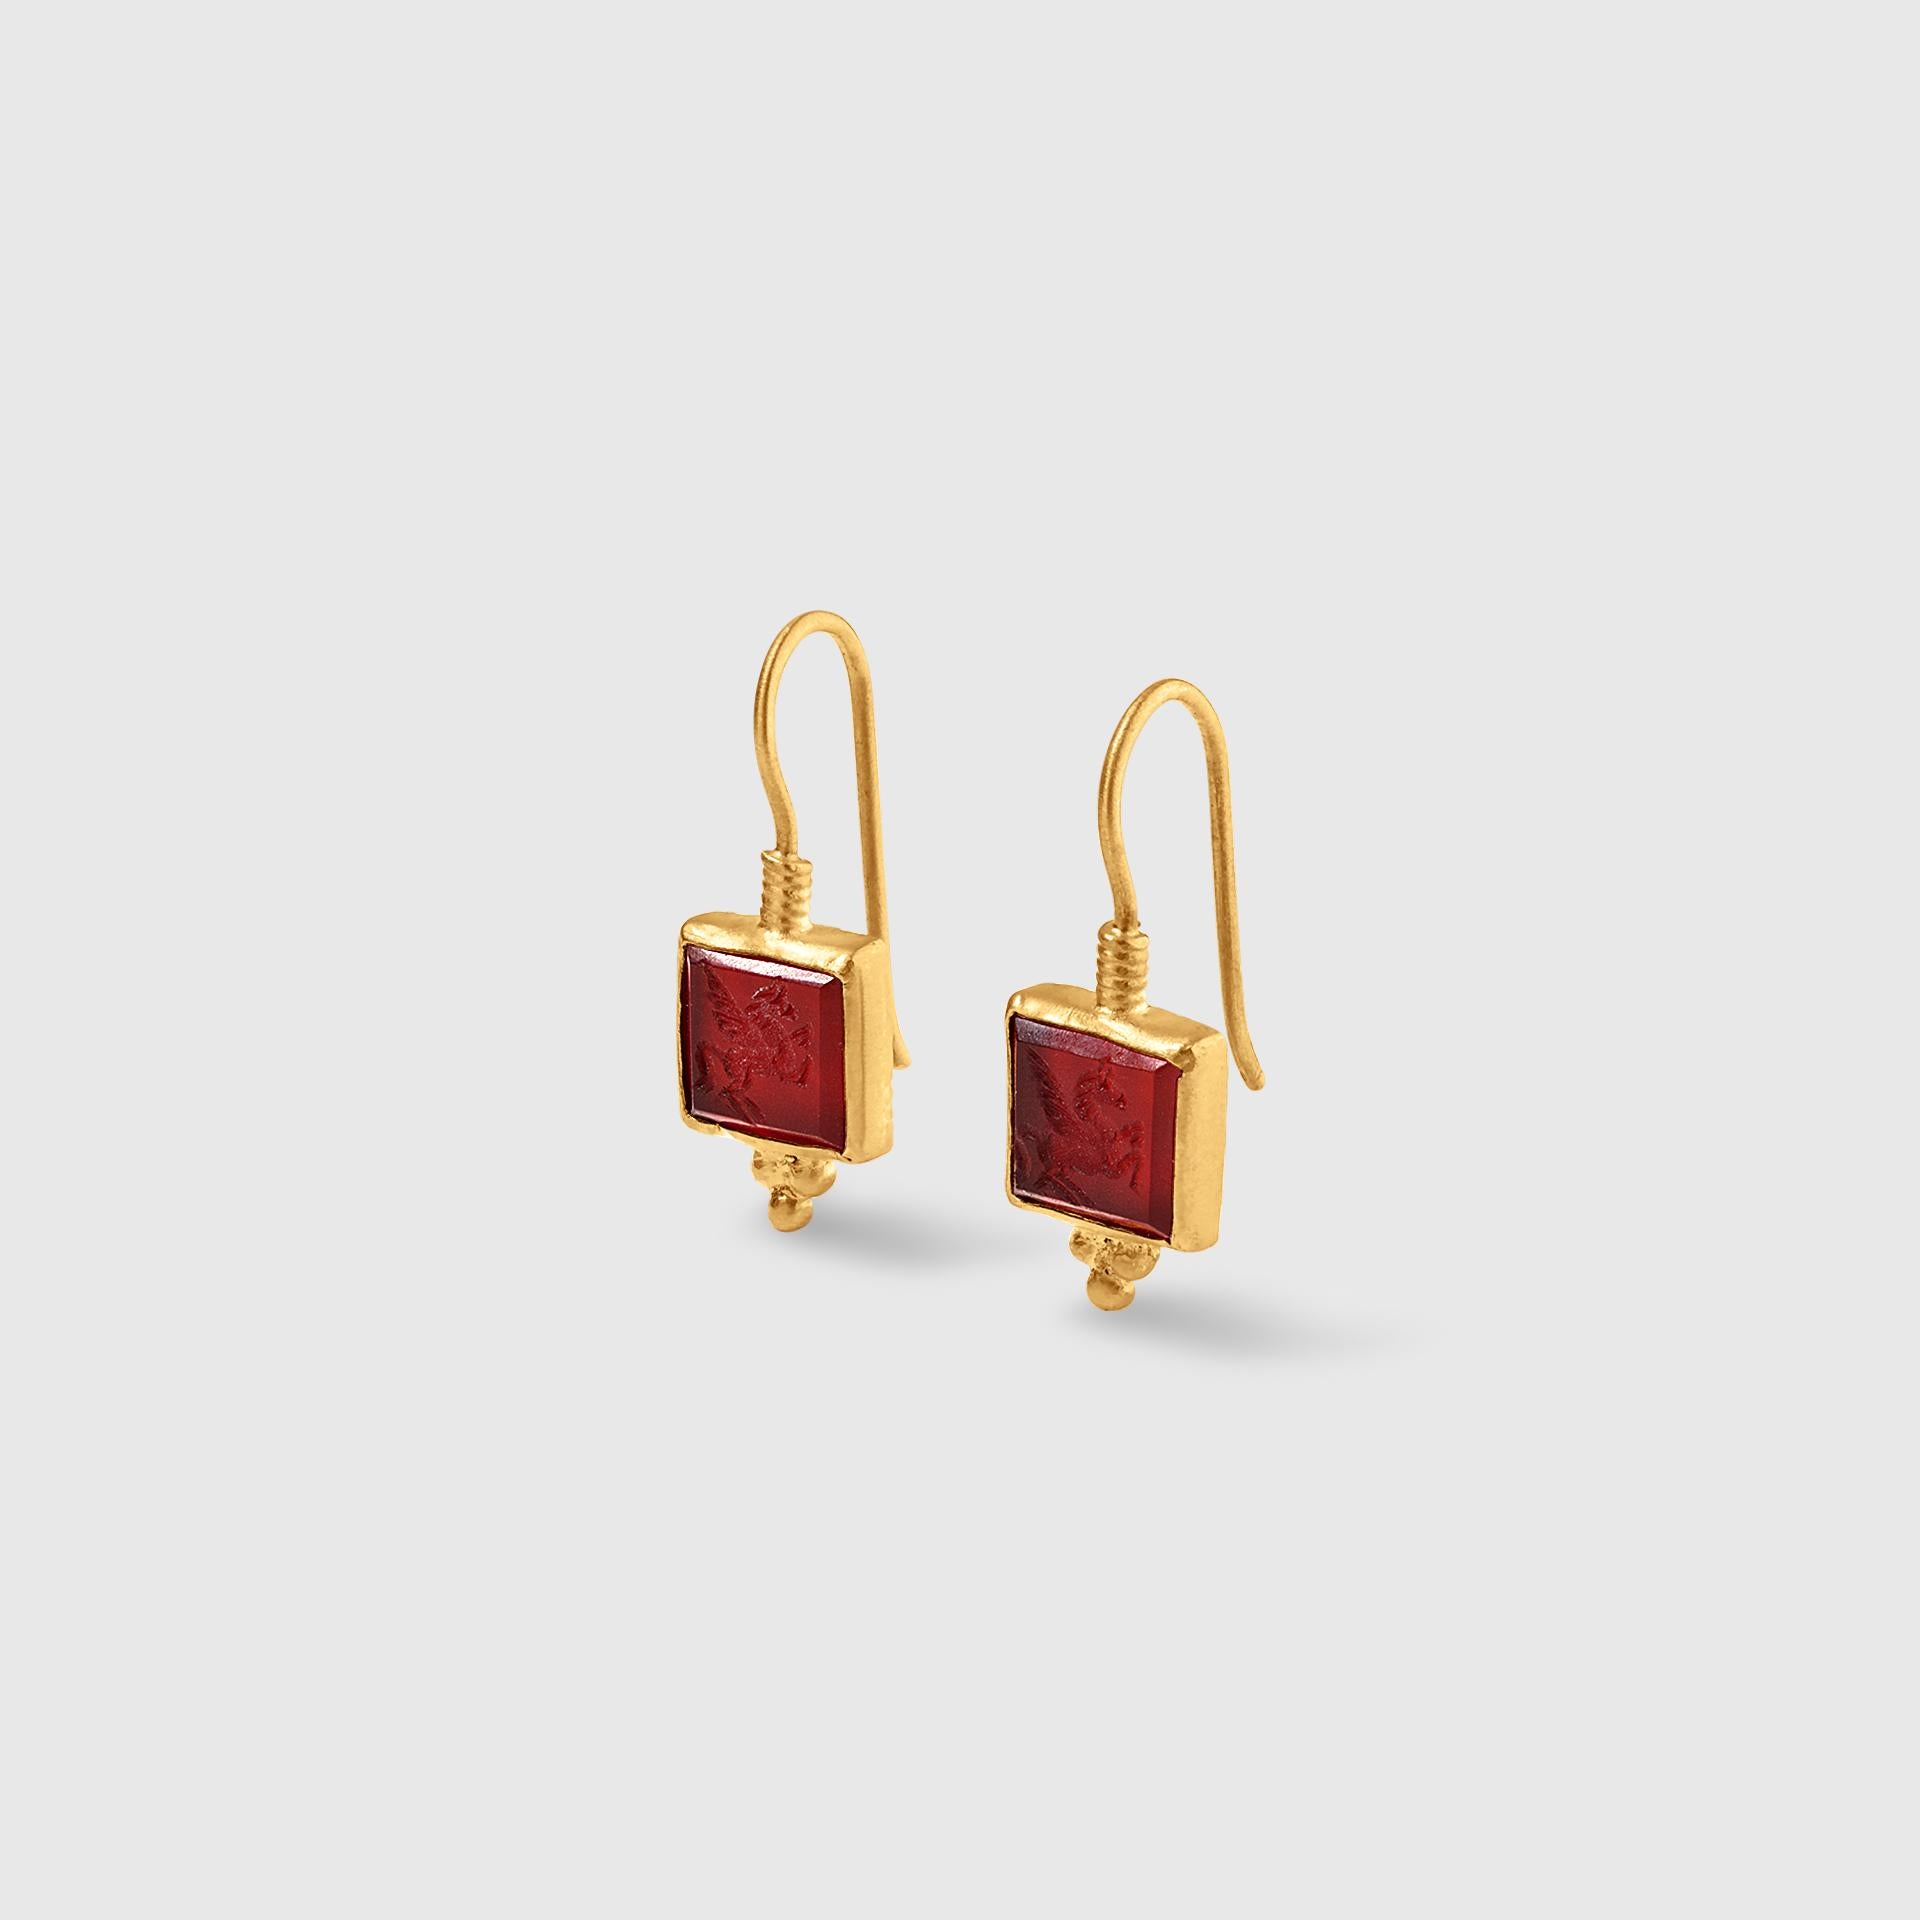 Carved red agate with Pegasus earrings with 24K yellow gold-fused on sterling silver. By Kurtulan Jewellery of Istanbul Turkey.  Delicate drop earrings with carved Pegasus detail.

ABOUT KURTULAN JEWELLERY OF INSTANBUL, TURKEY:
Kurtulan jewellery